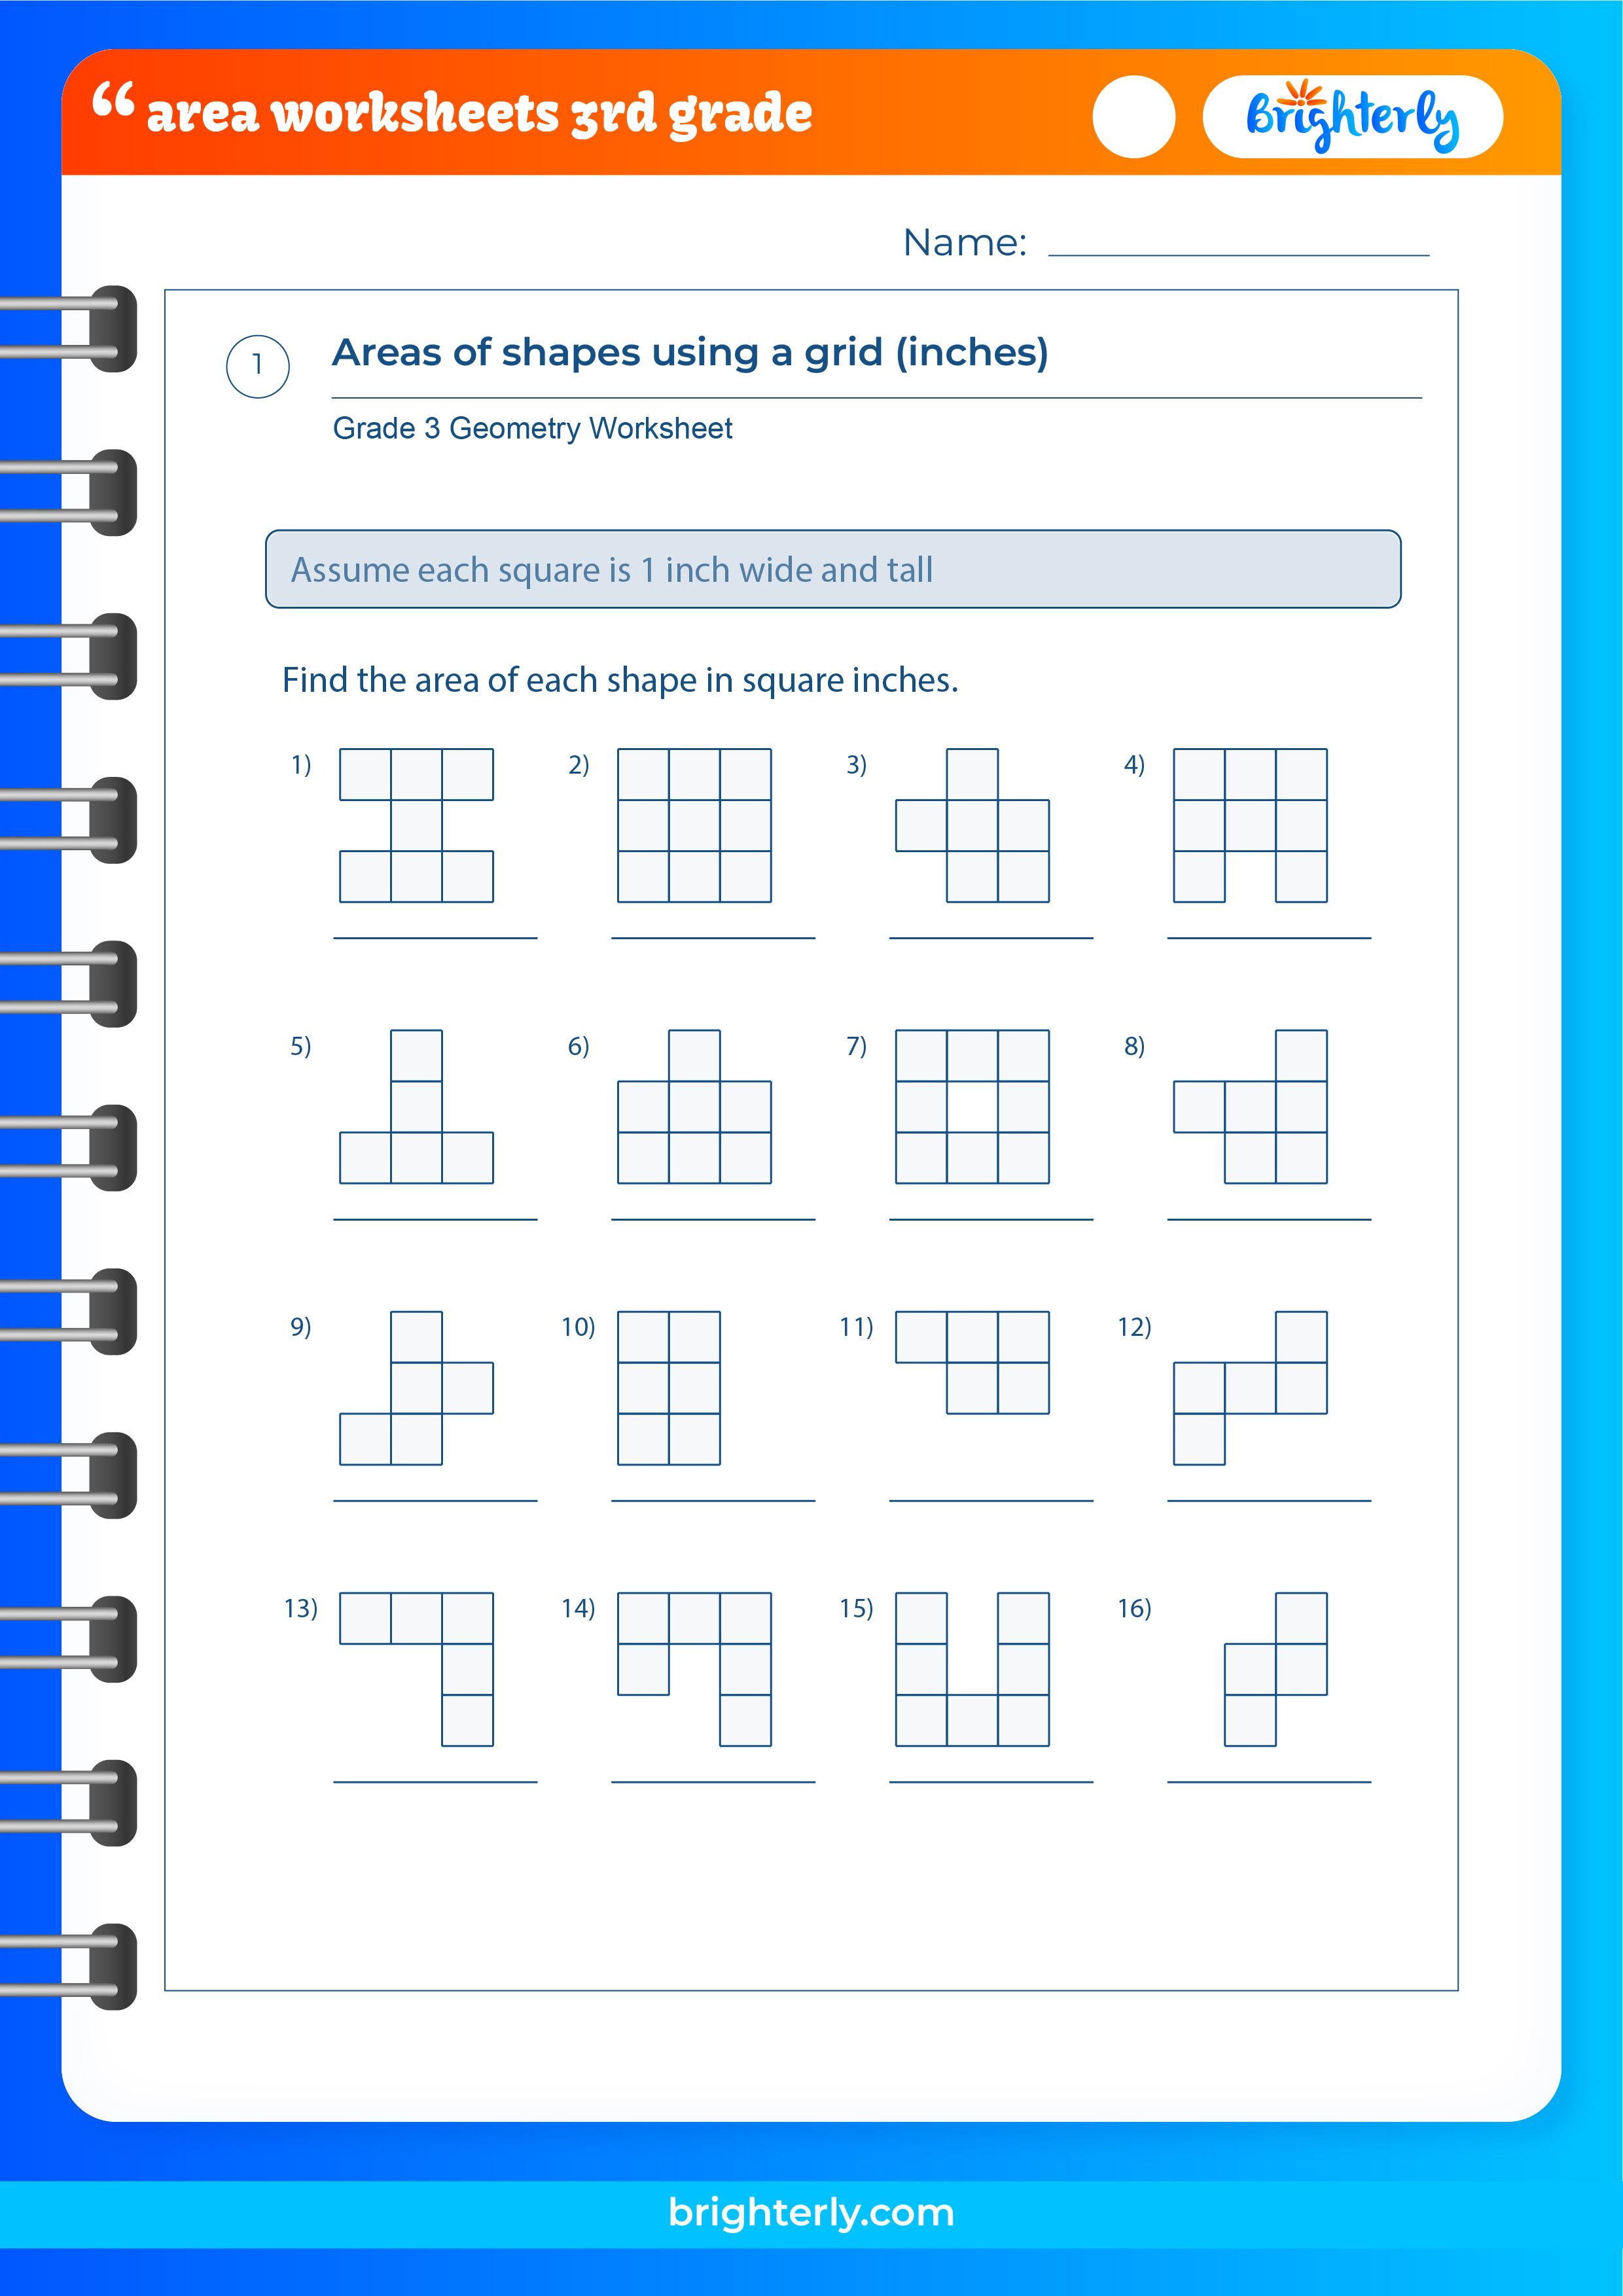 free-area-worksheets-for-3rd-grade-students-pdfs-brighterly